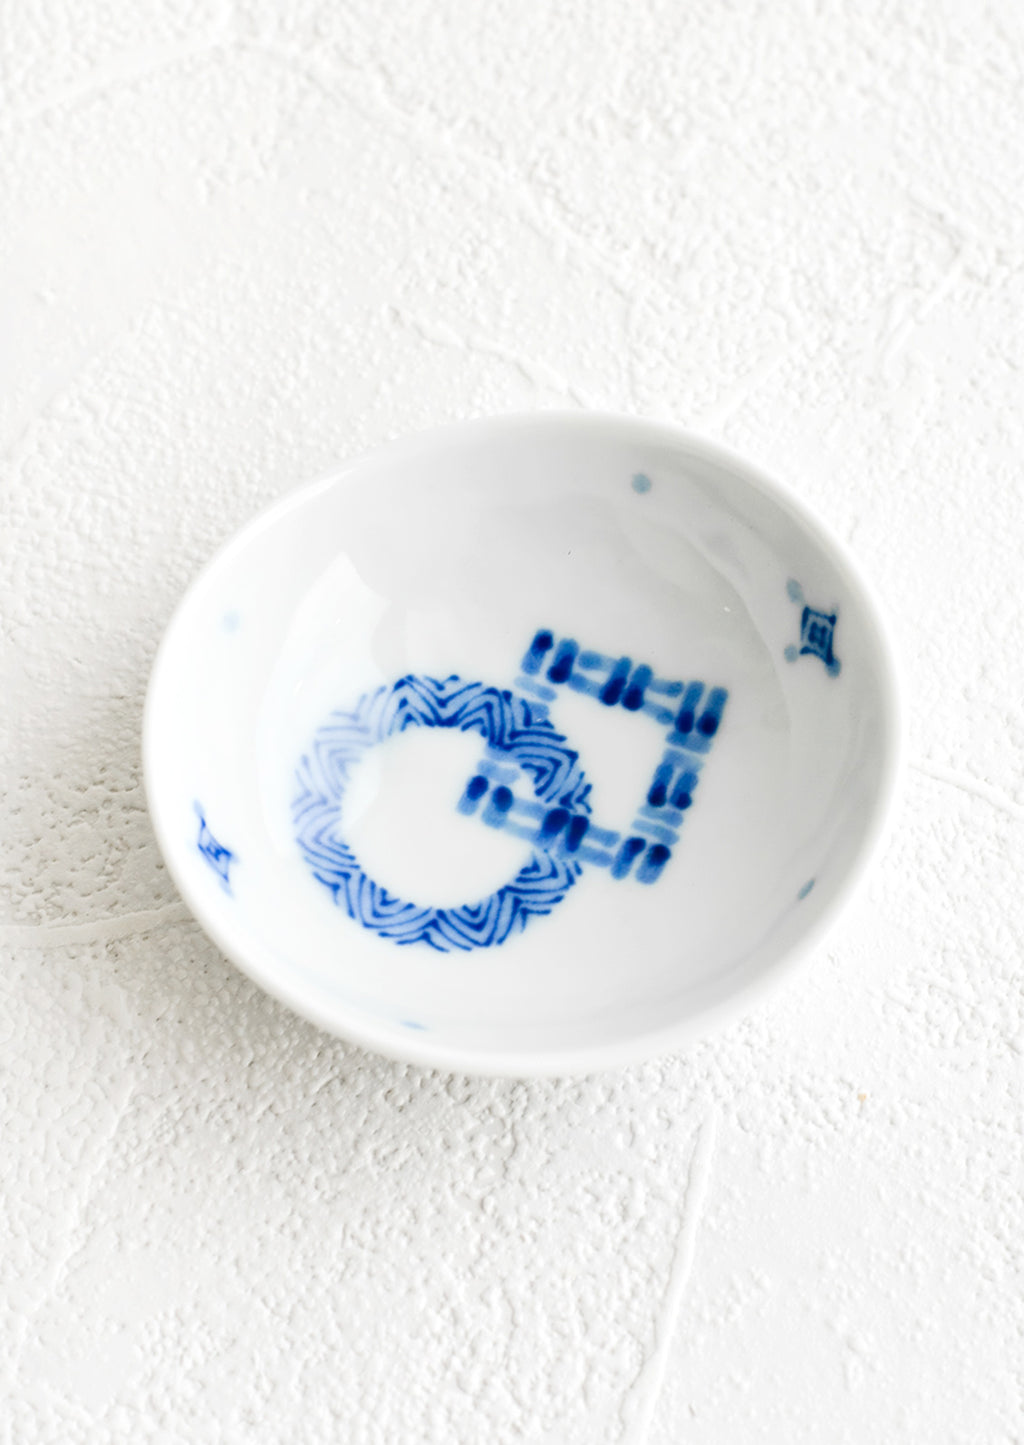 1: A round ceramic trinket dish with abstract pattern in blue.